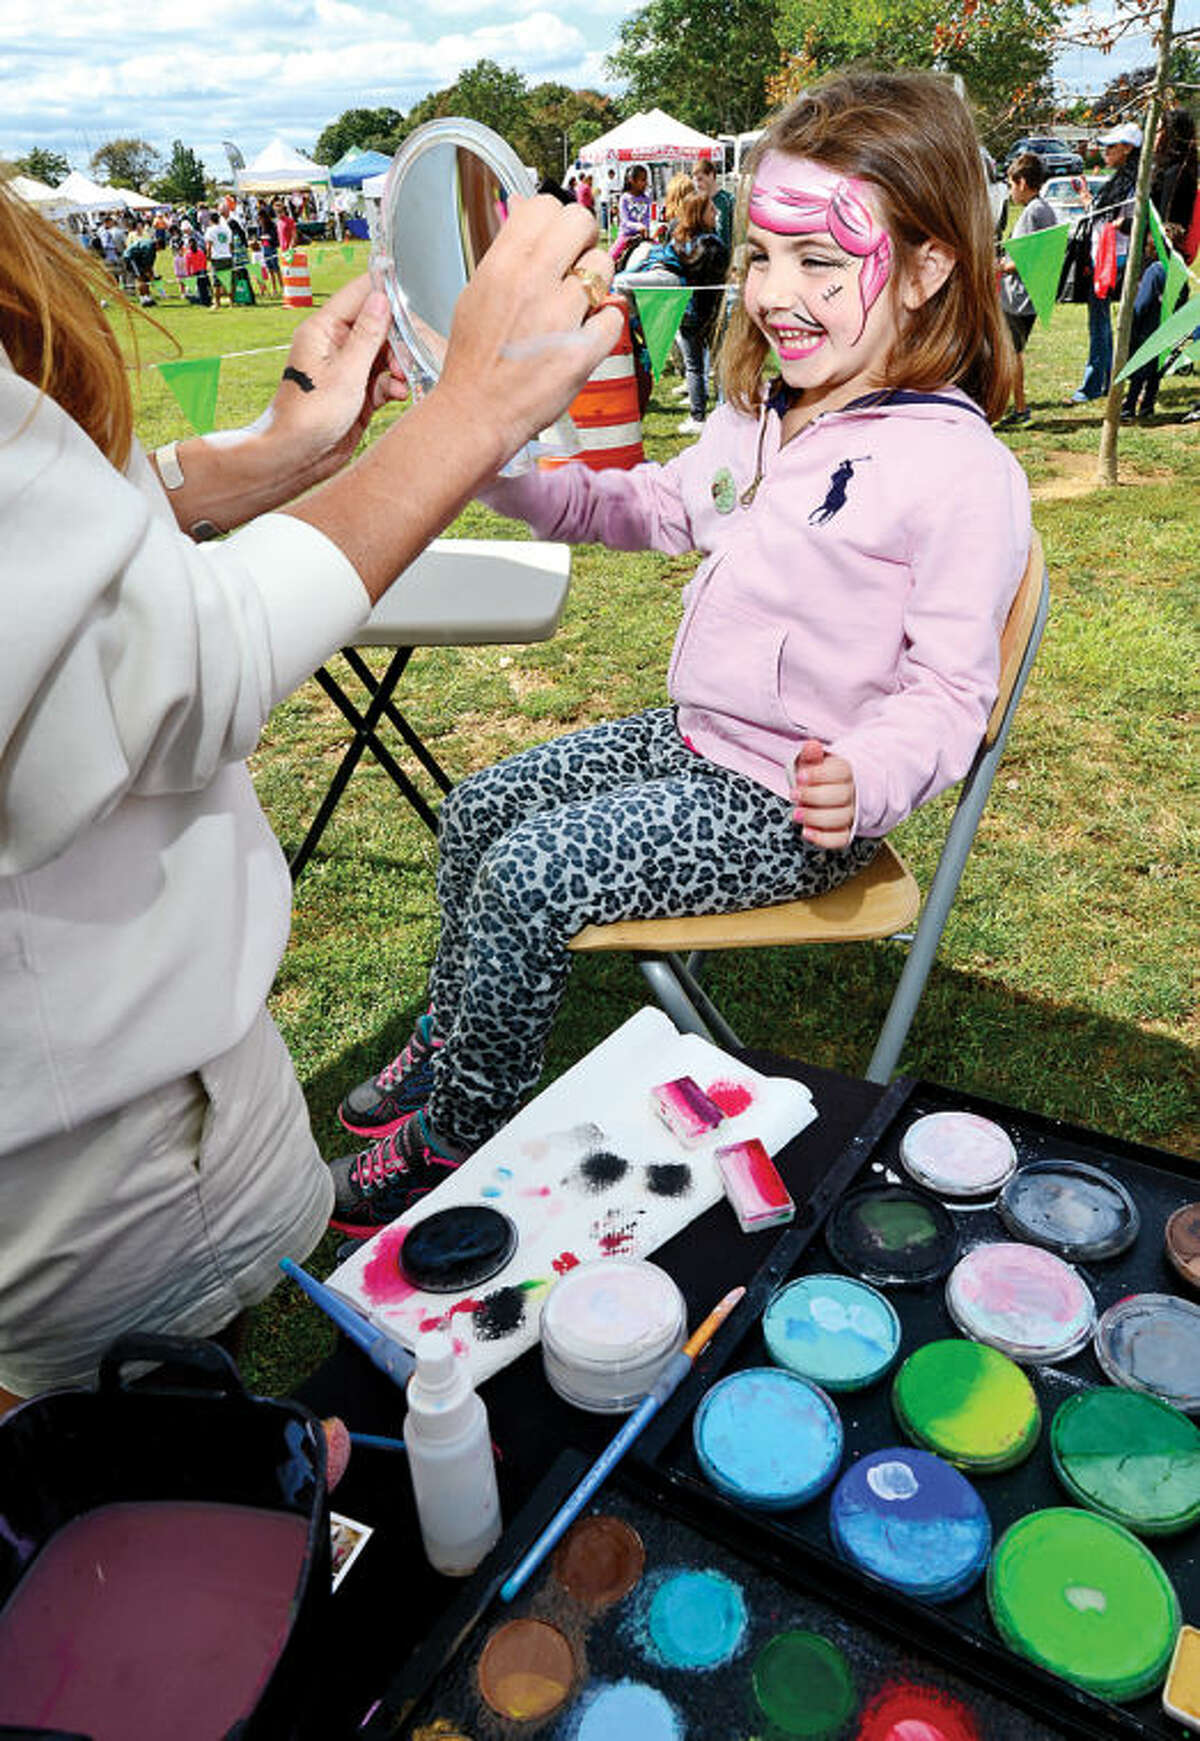 Madison Farrer,5, gets her face painted during the Live Green Connecticut! green-living and family festival Saturday at Taylor Farm Park. The two-day festival promotes living green with a focus on education, sustainability, caring for the environment and our natural resources.Hour photo / Erik Trautmann